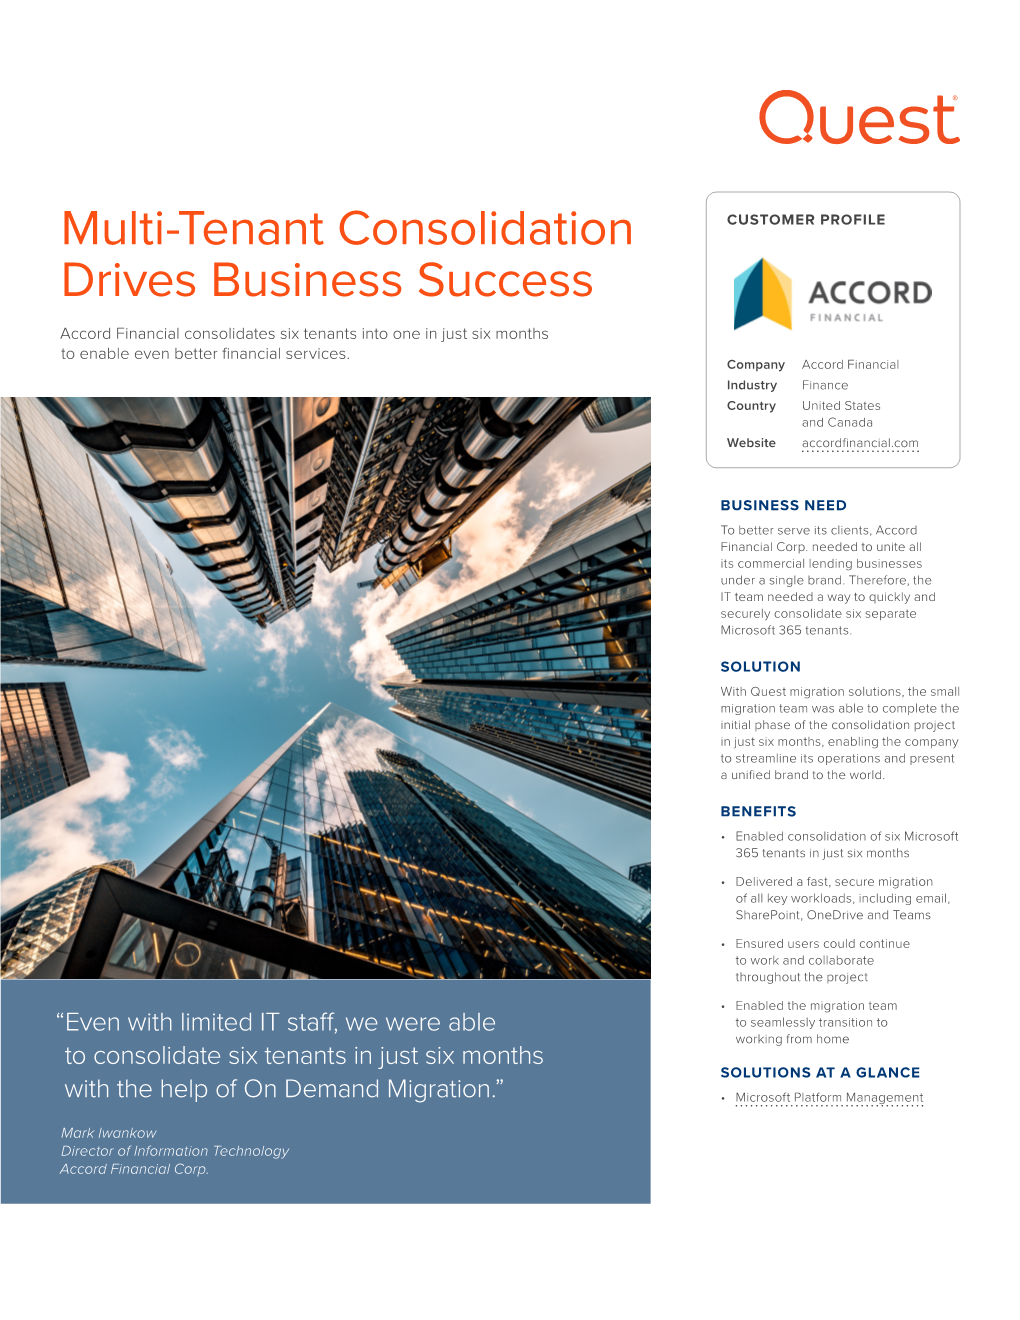 Multi-Tenant Consolidation Drives Business Success